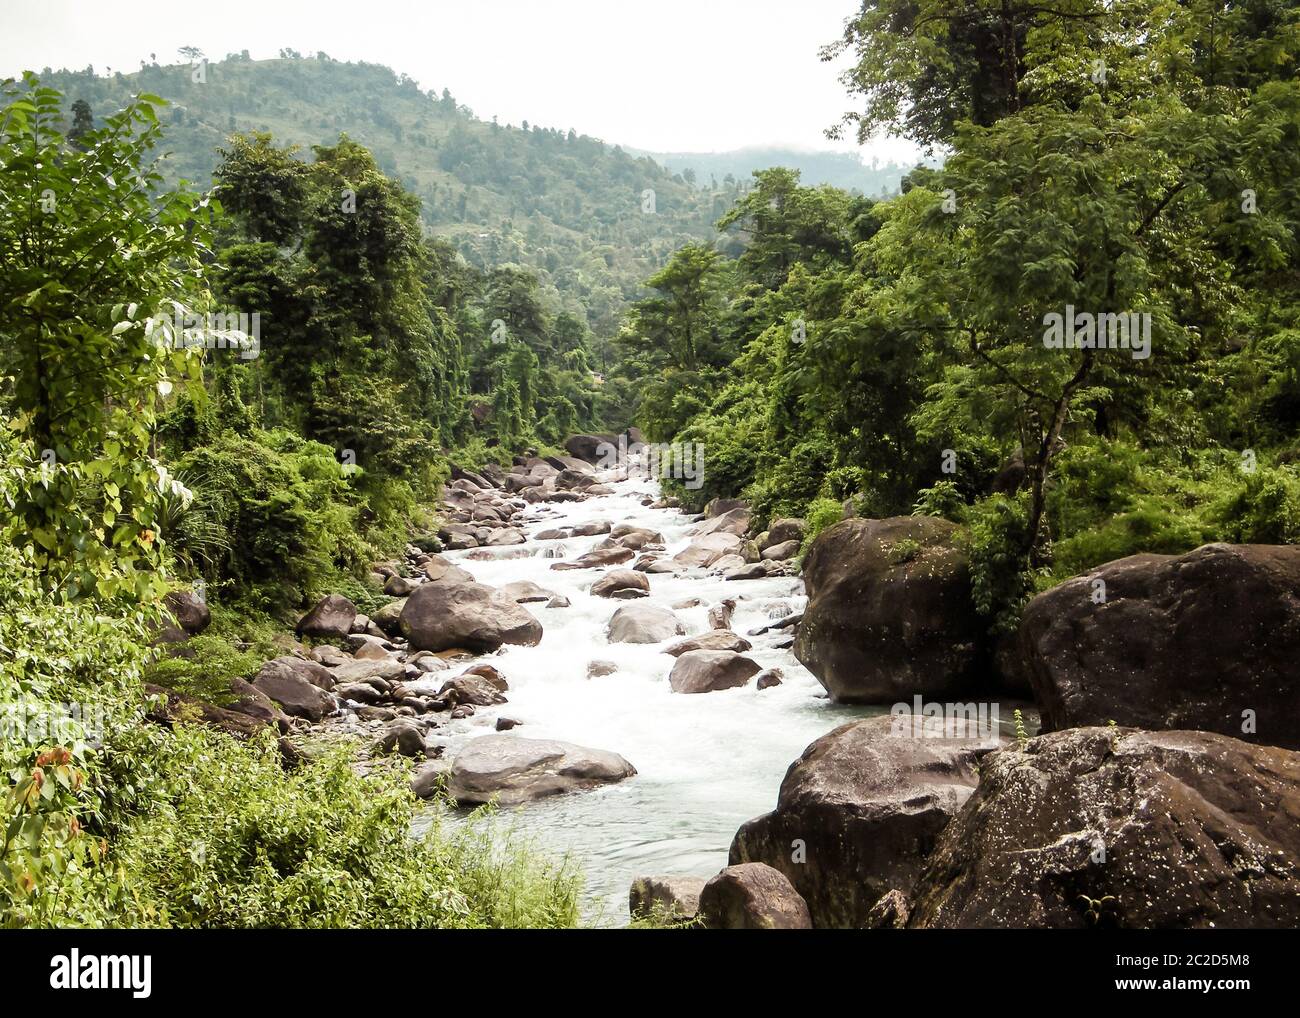 Main tributary of river Teesta, the Rangit river flowing through a dense pristine jungle in northeast of Rangpo Chu at Rangpo settlement just before t Stock Photo